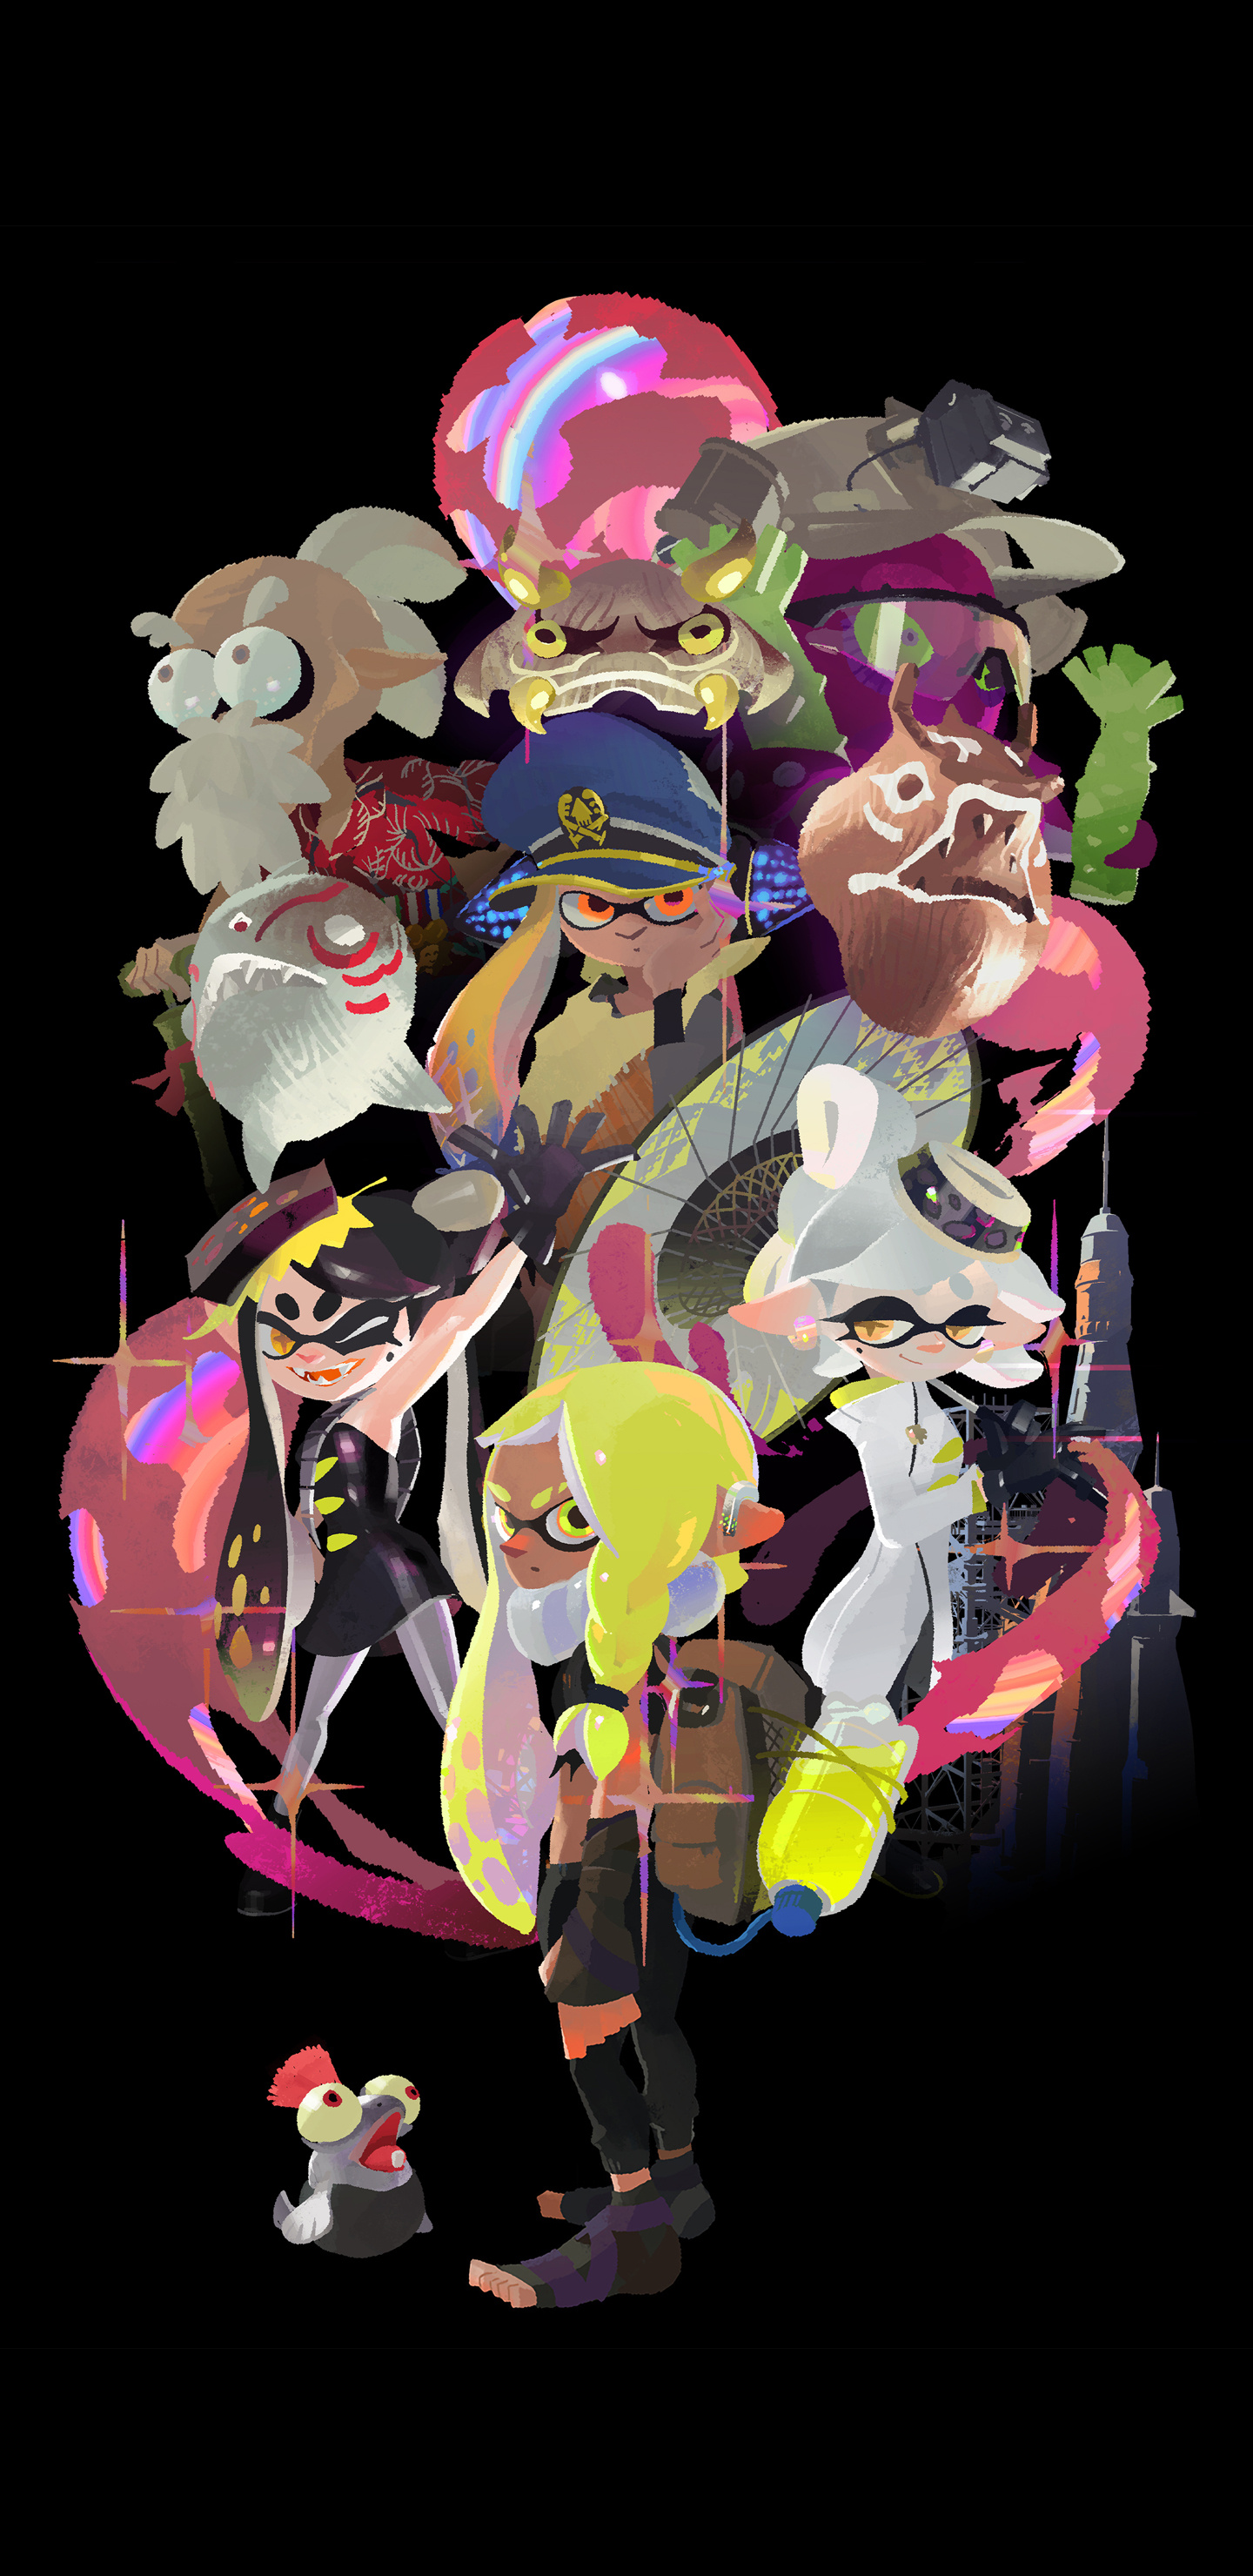 Splatoon 3: The series sold over 18 million copies, Awarded several year-end accolades. 1440x2960 HD Wallpaper.